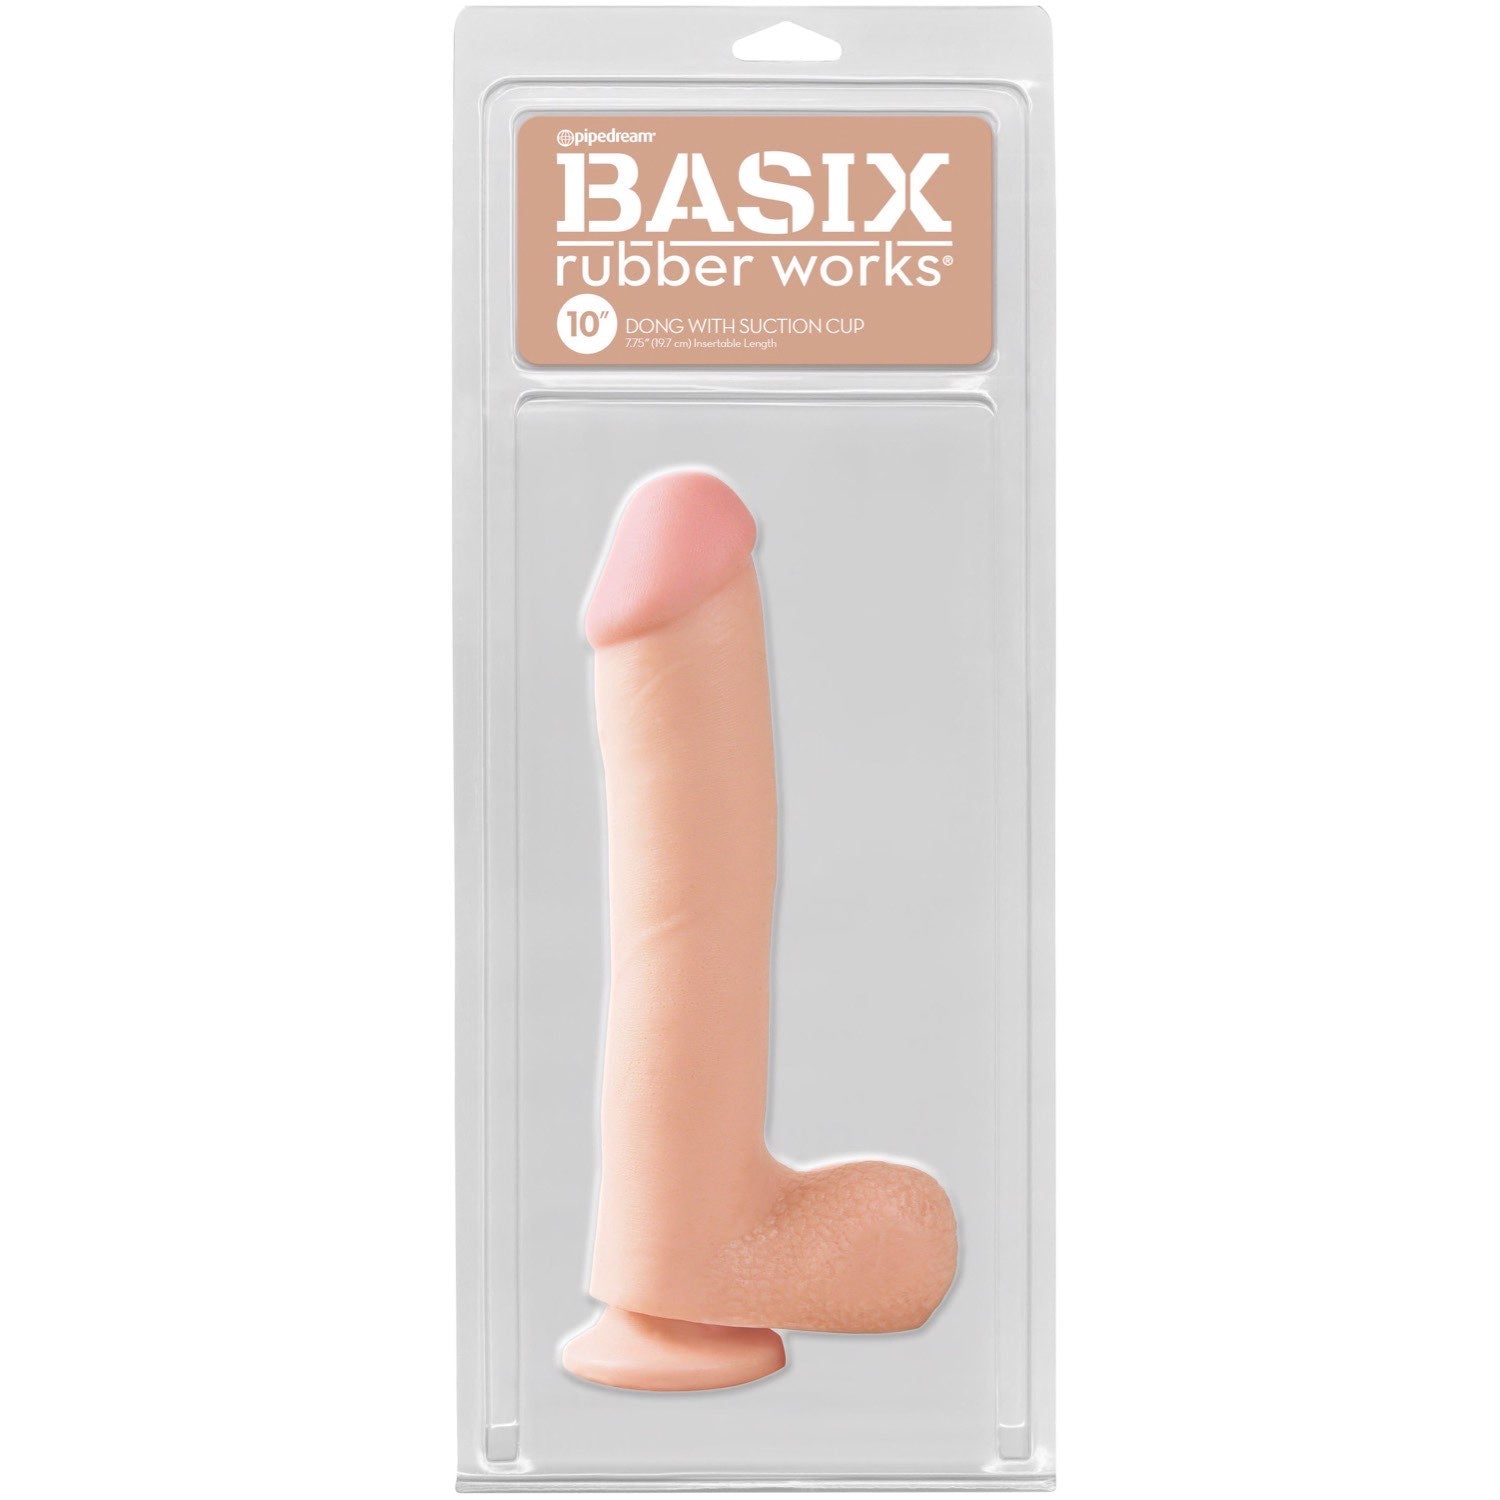 Basix Rubber Works 10&quot; Dong with Suction Cup - Flesh 25.4 cm (10&quot;) Dong by Pipedream